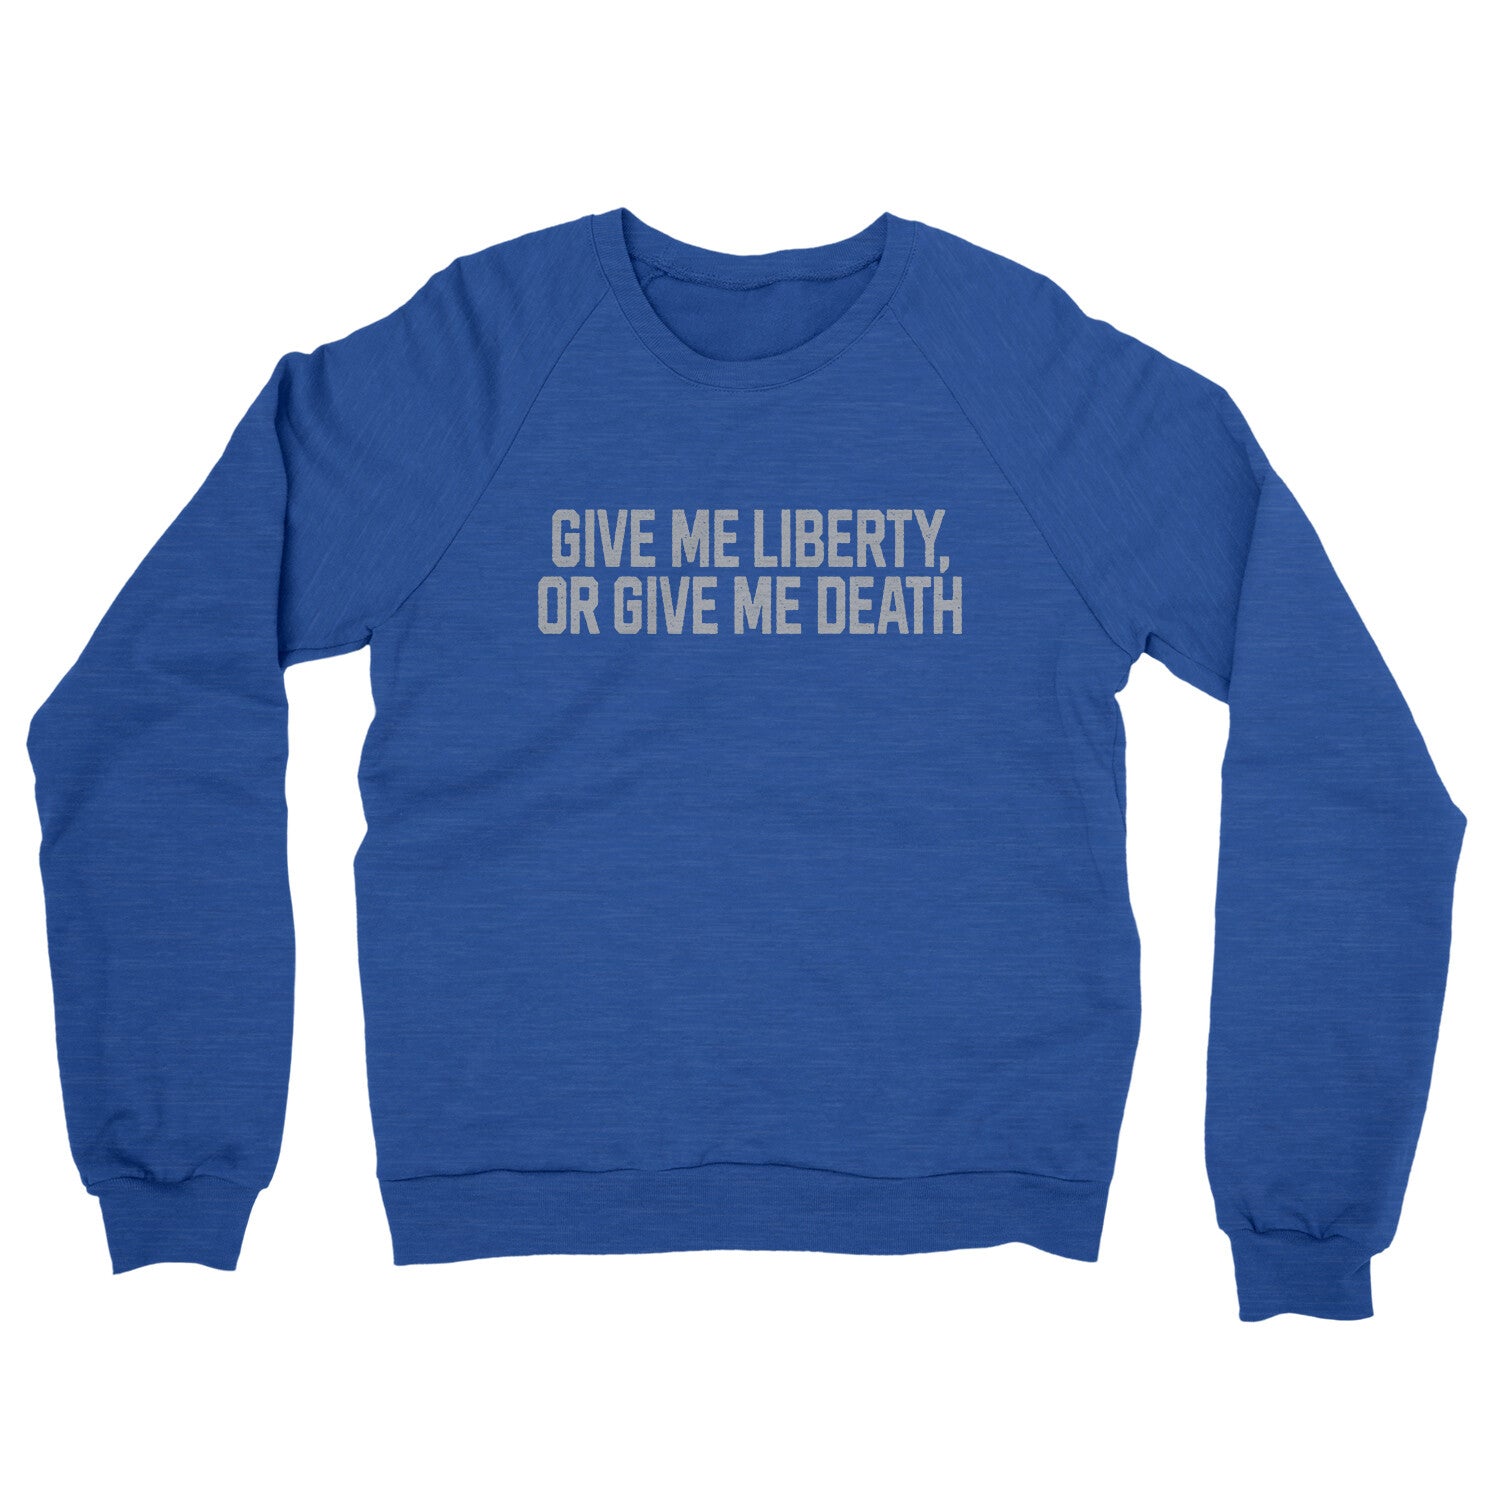 Give Me Liberty or Give Me Death in Heather Royal Color